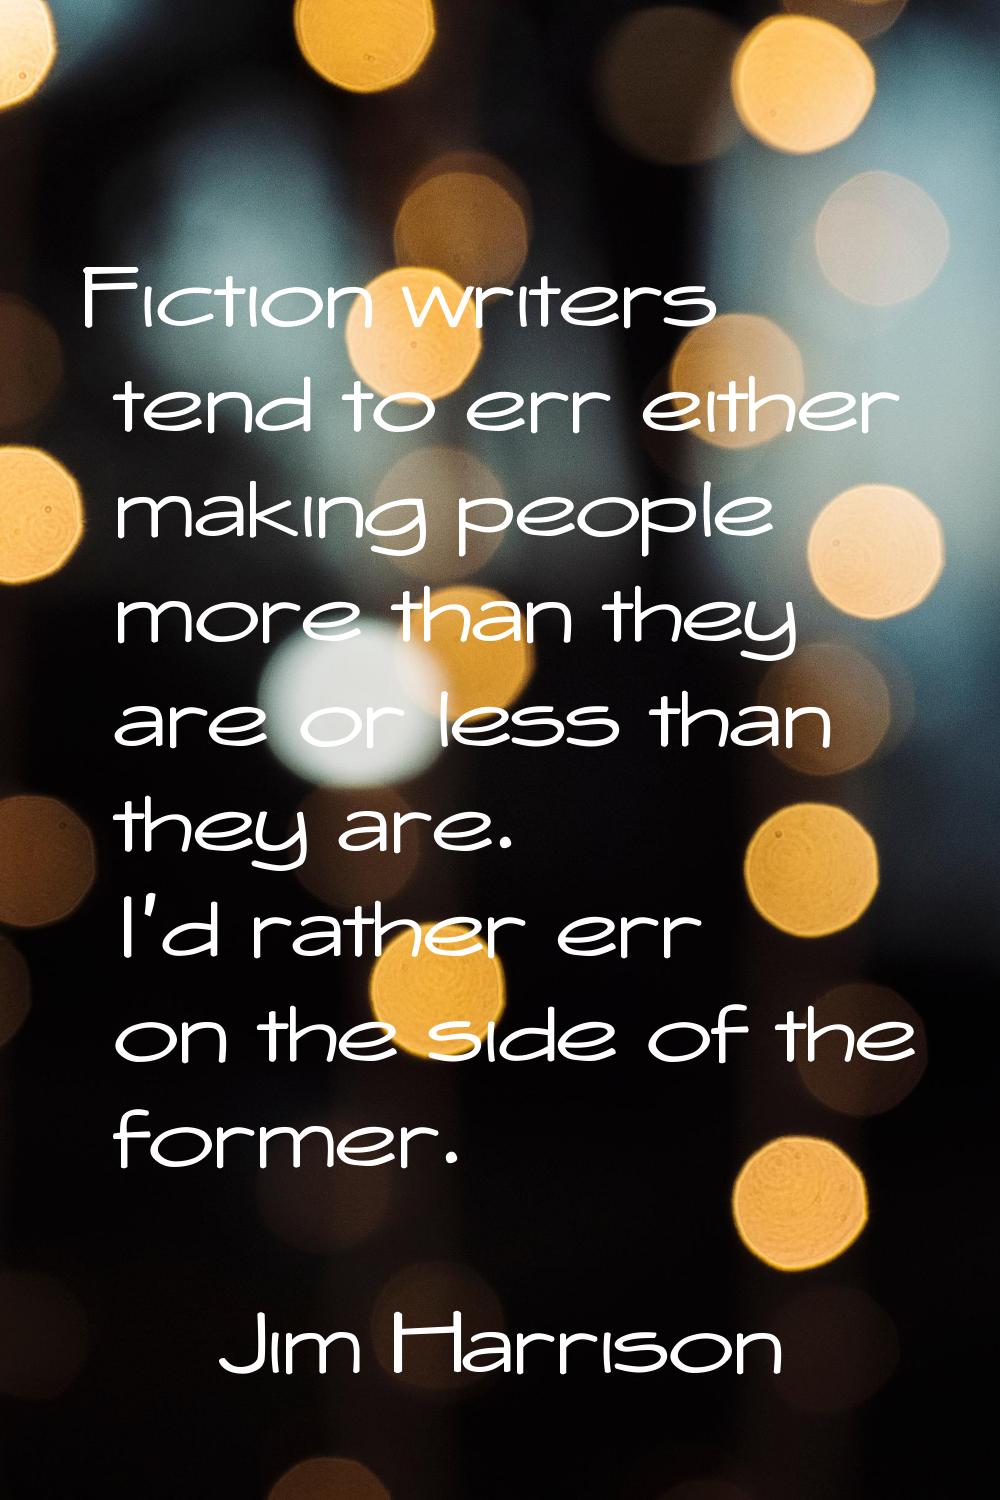 Fiction writers tend to err either making people more than they are or less than they are. I'd rath